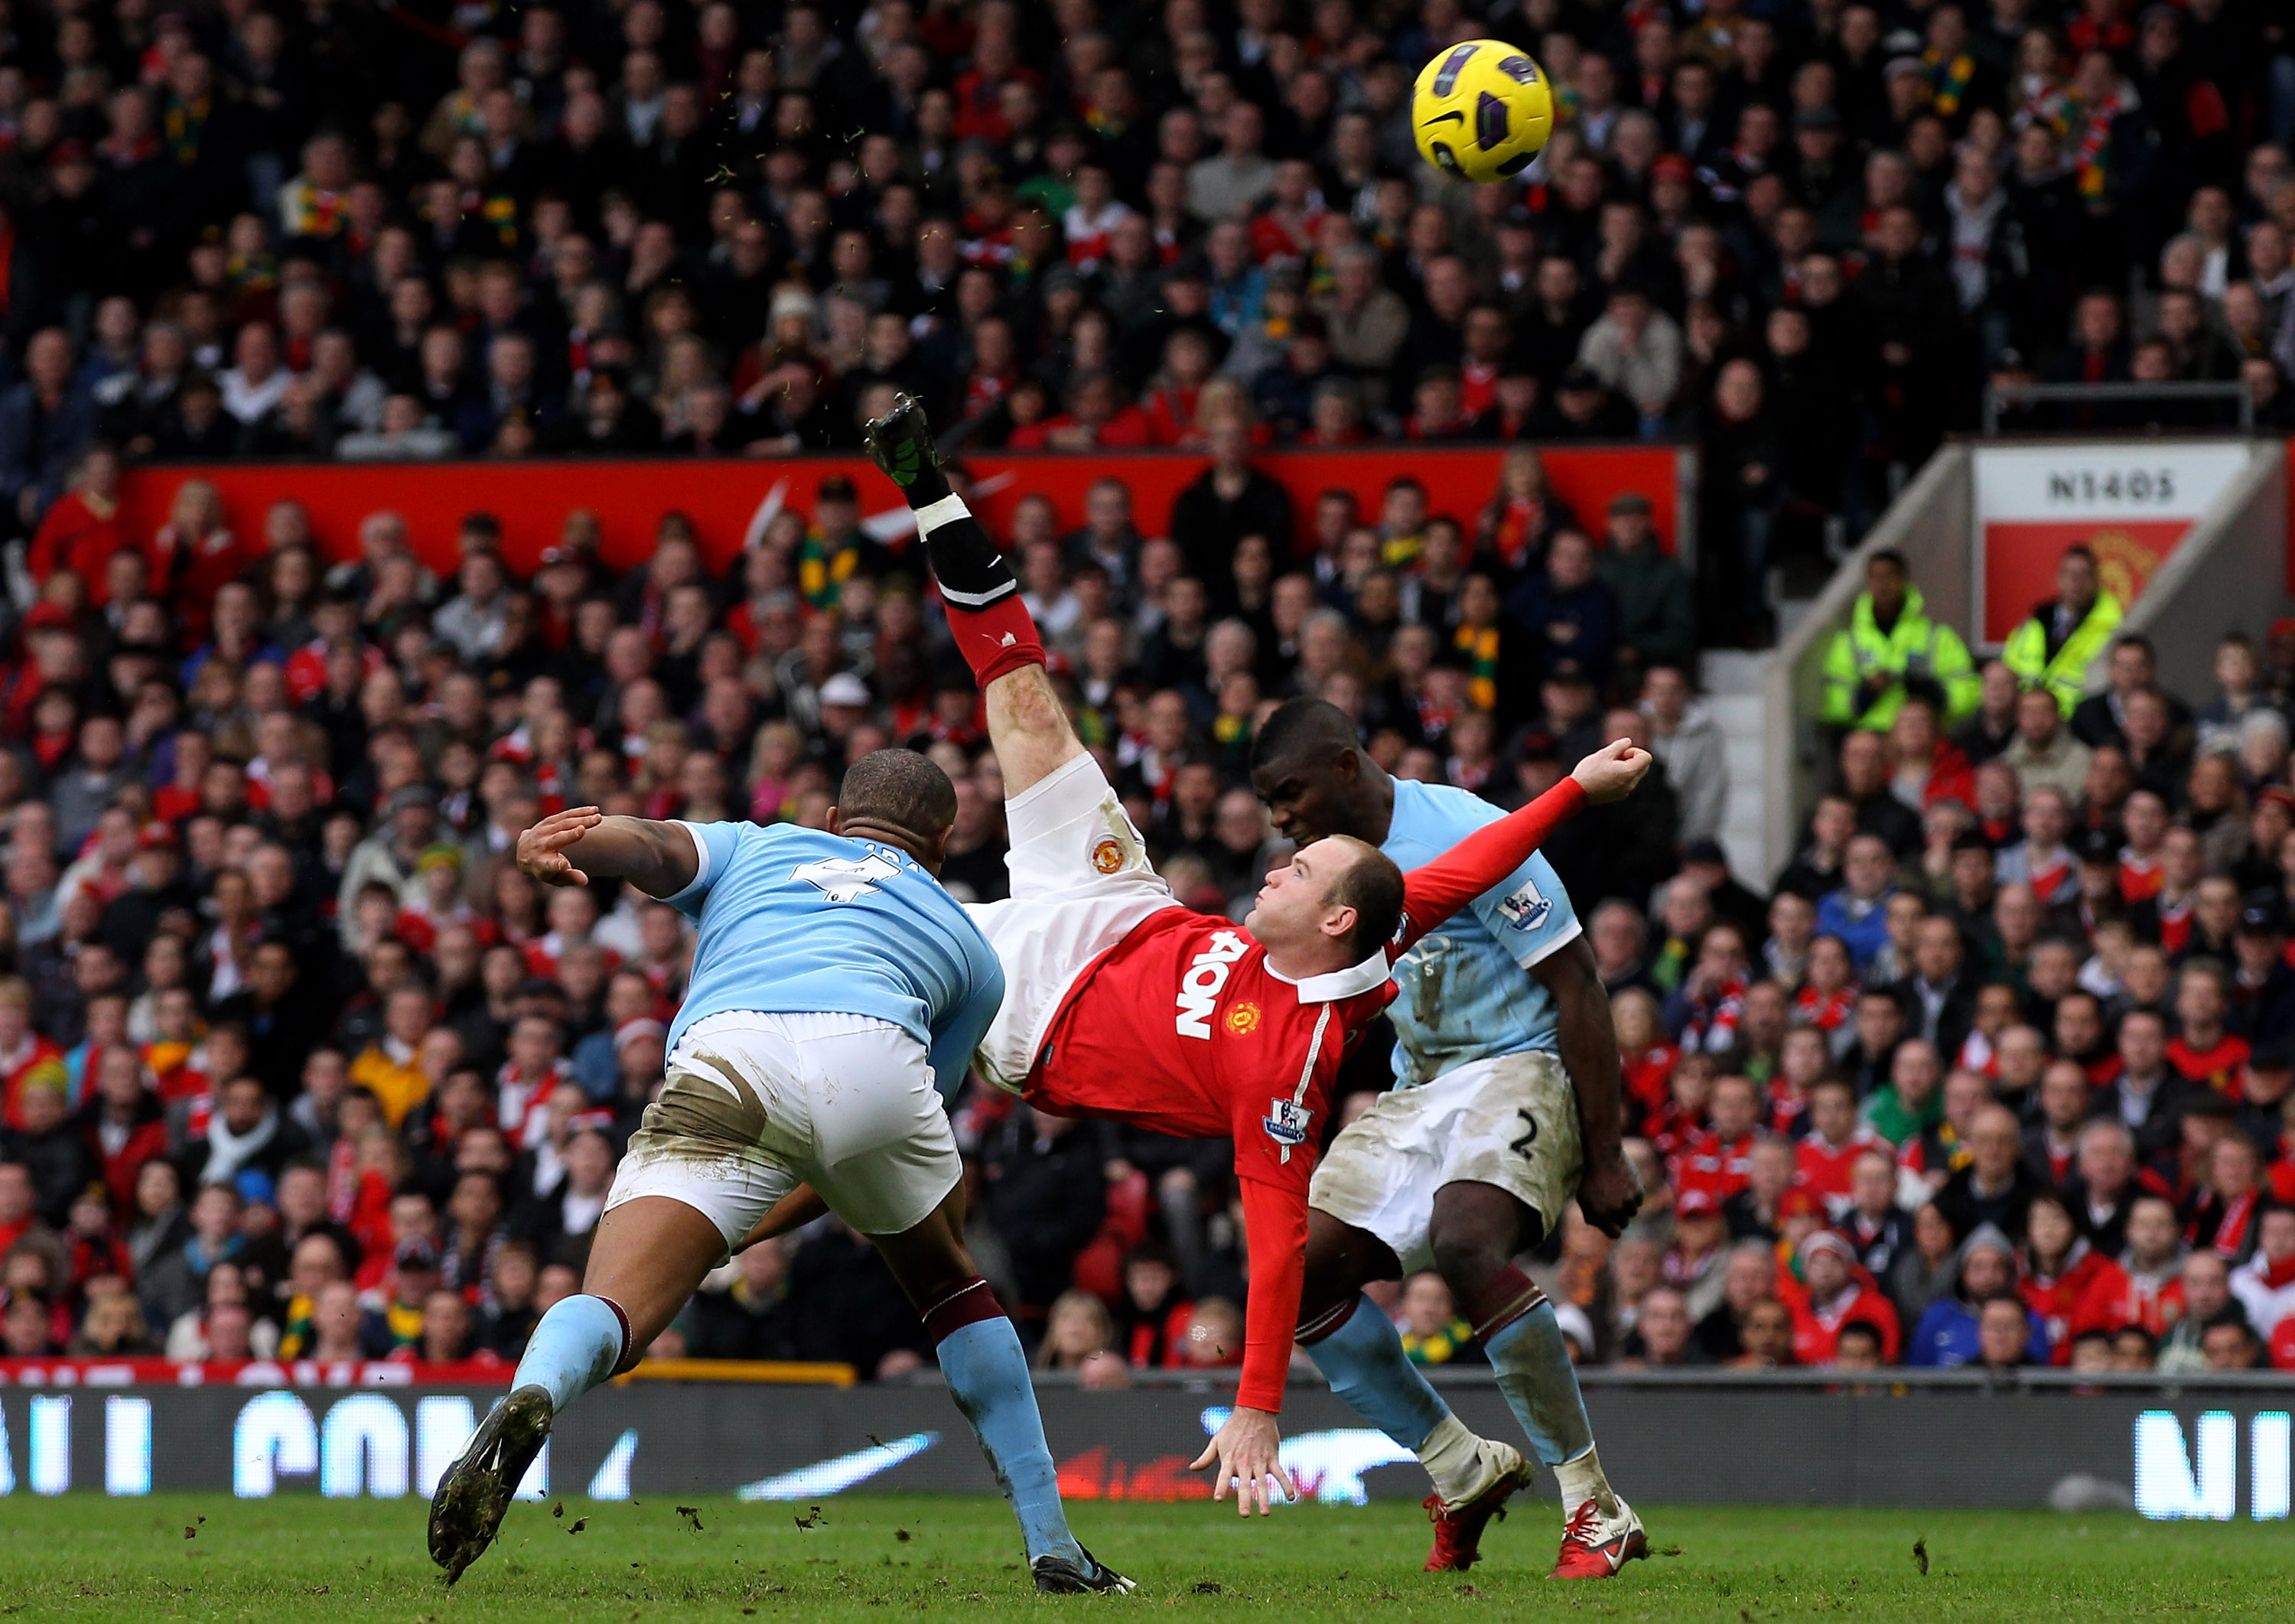 MANCHESTER, ENGLAND - FEBRUARY 12:  Wayne Rooney of Manchester United scores a goal from an overhead kick during the Barclays Premier League match between Manchester United and Manchester City at Old Trafford on February 12, 2011 in Manchester, England.